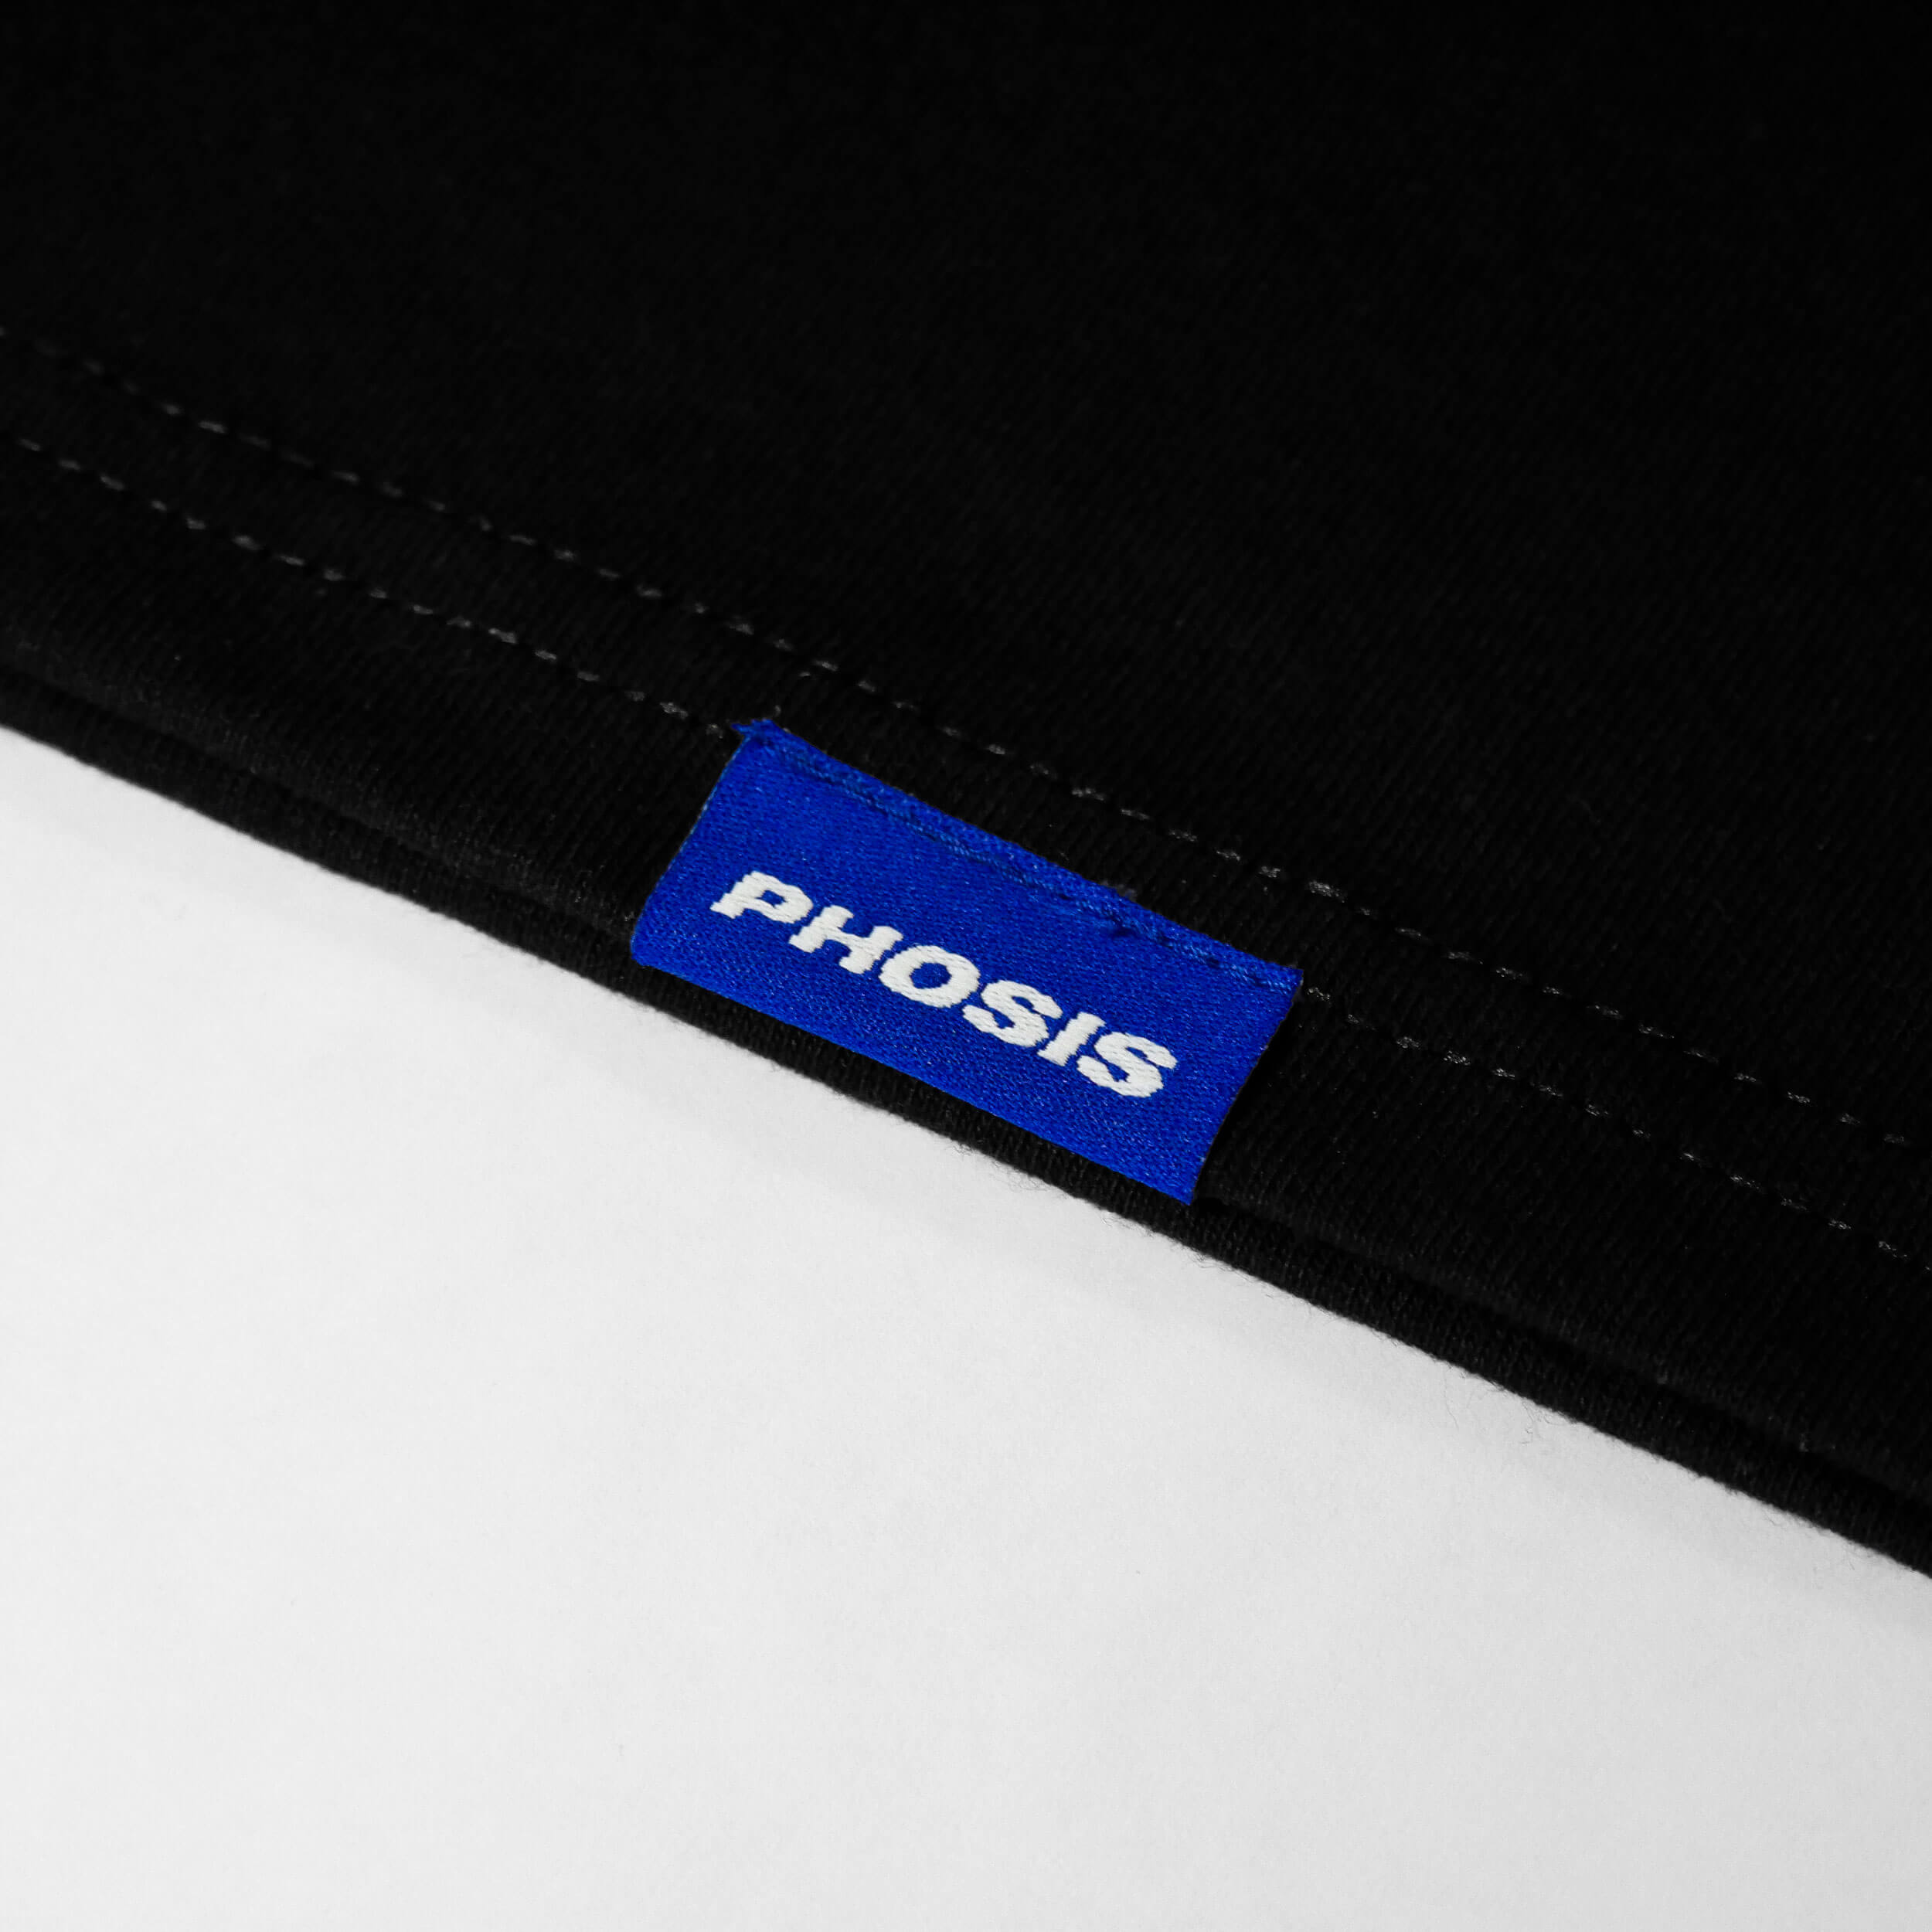 Close up view of the blue woven label in the ANTARTICA POST black t-shirt from PHOSIS Clothing